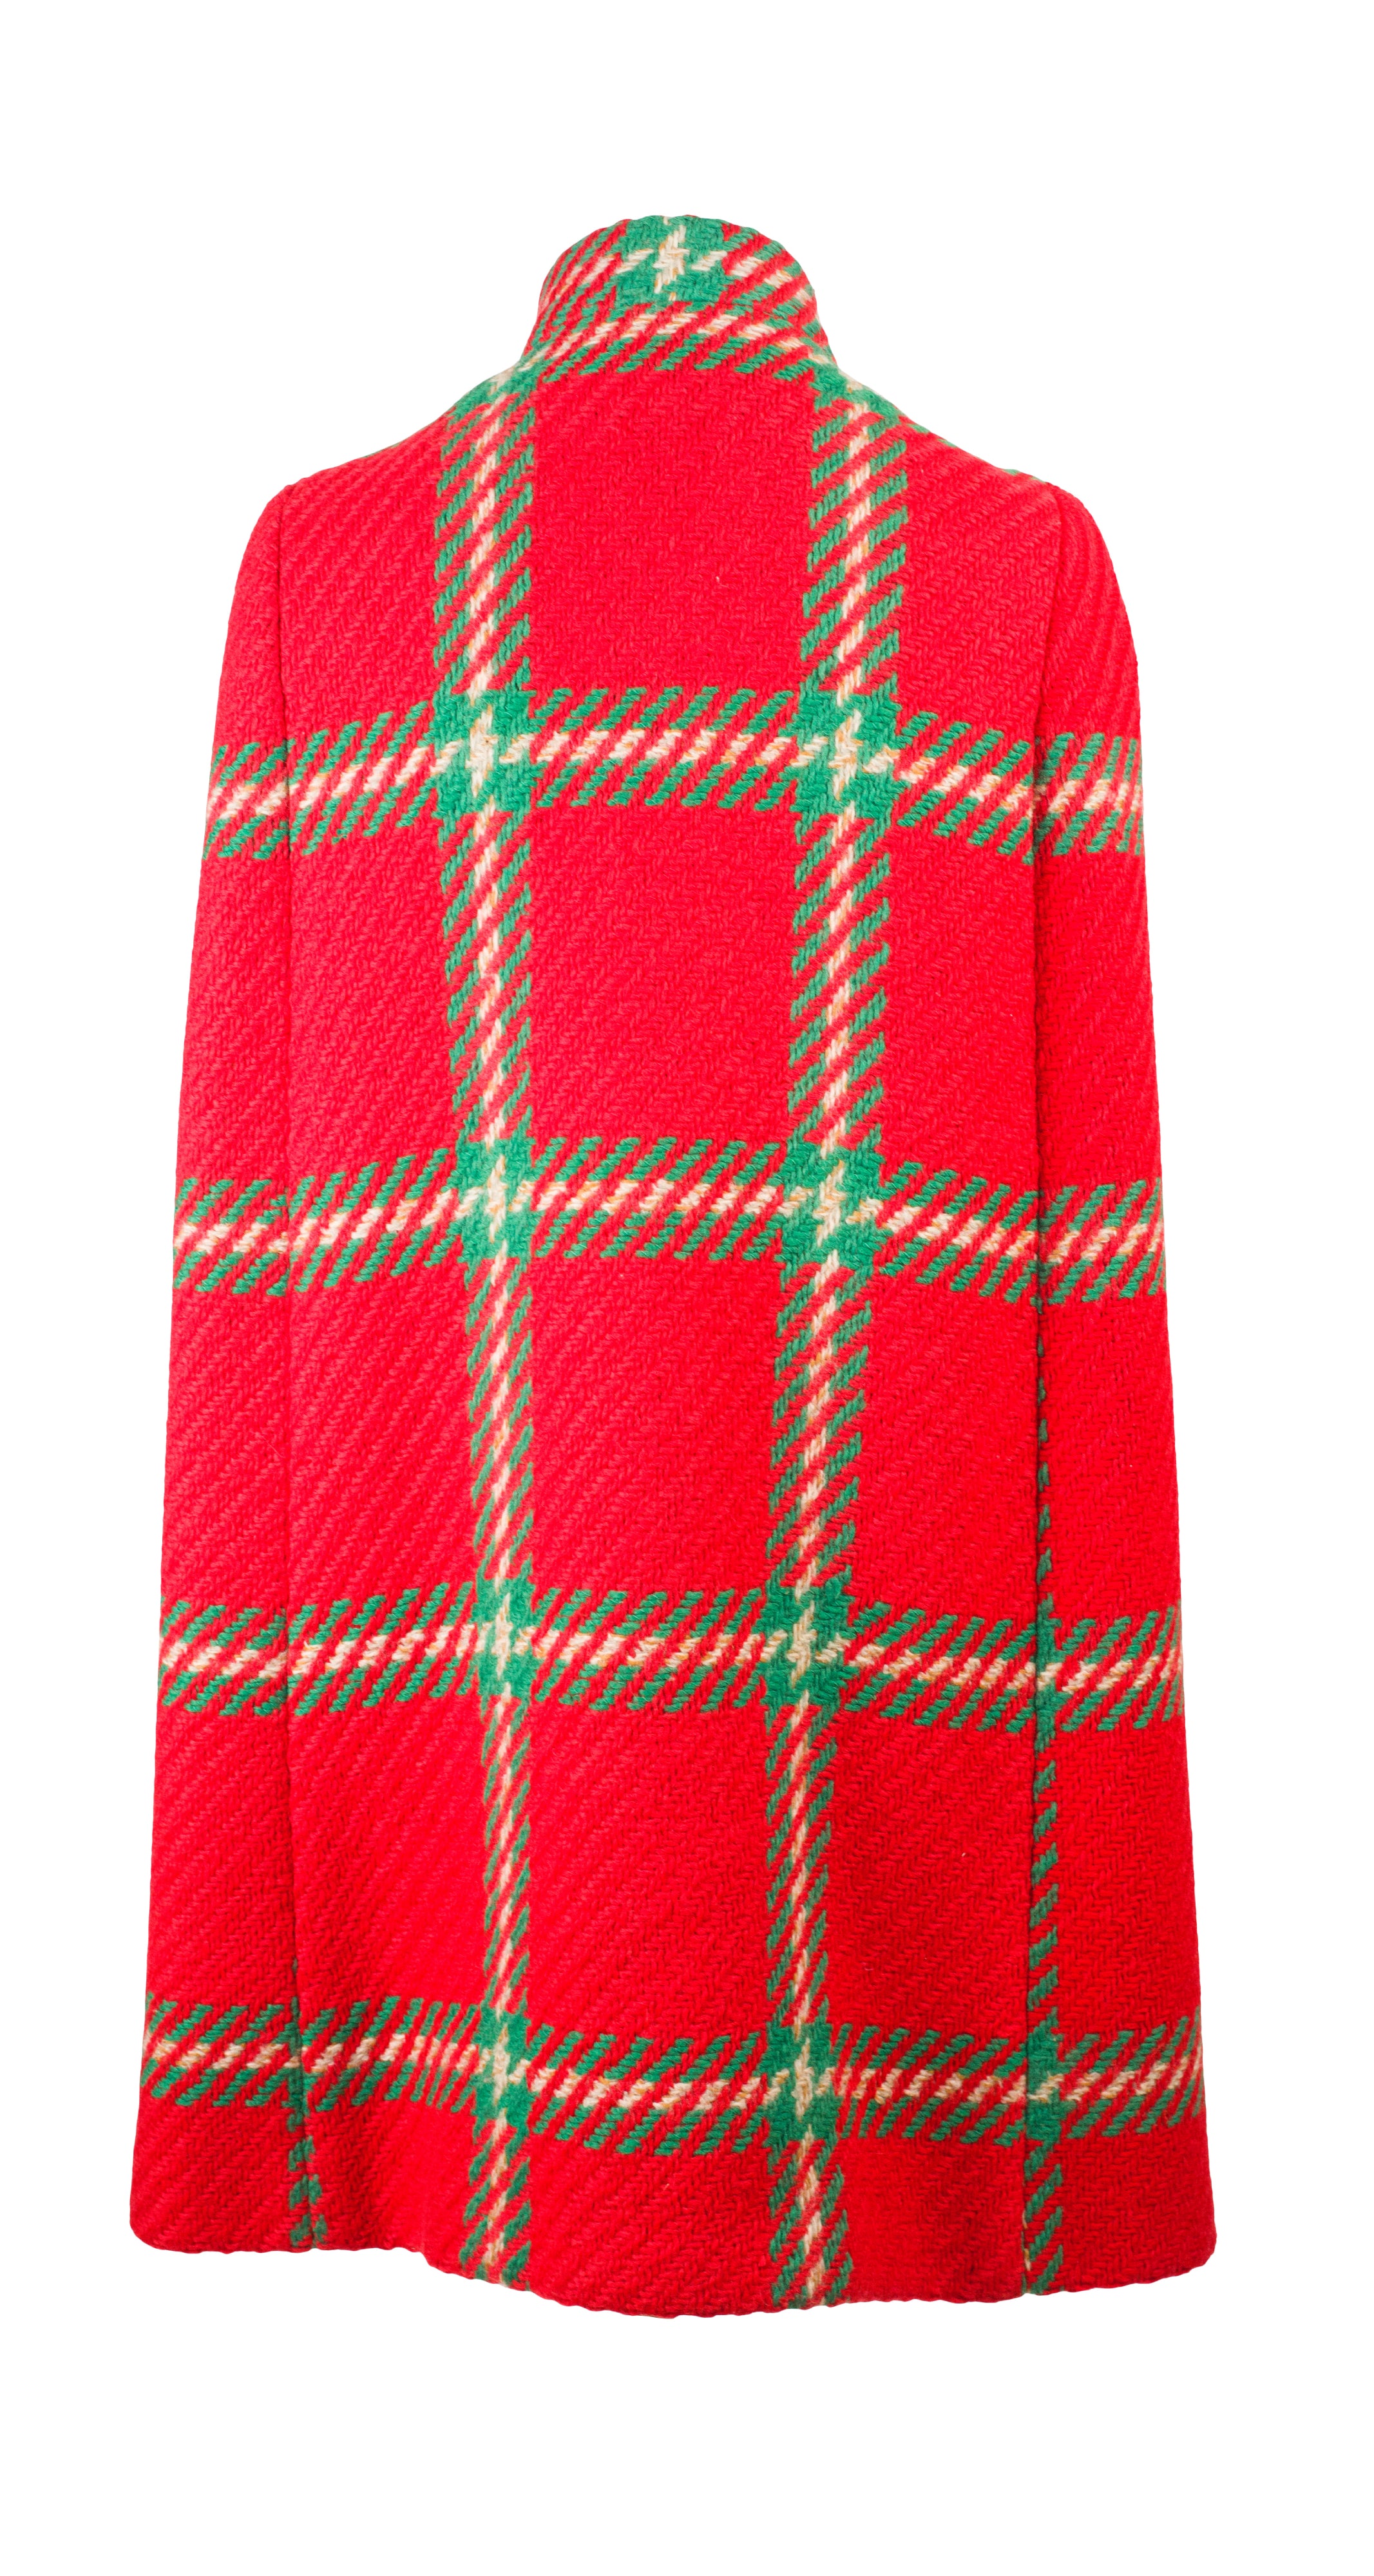 1960s Mod Red & Green Plaid Wool Cape